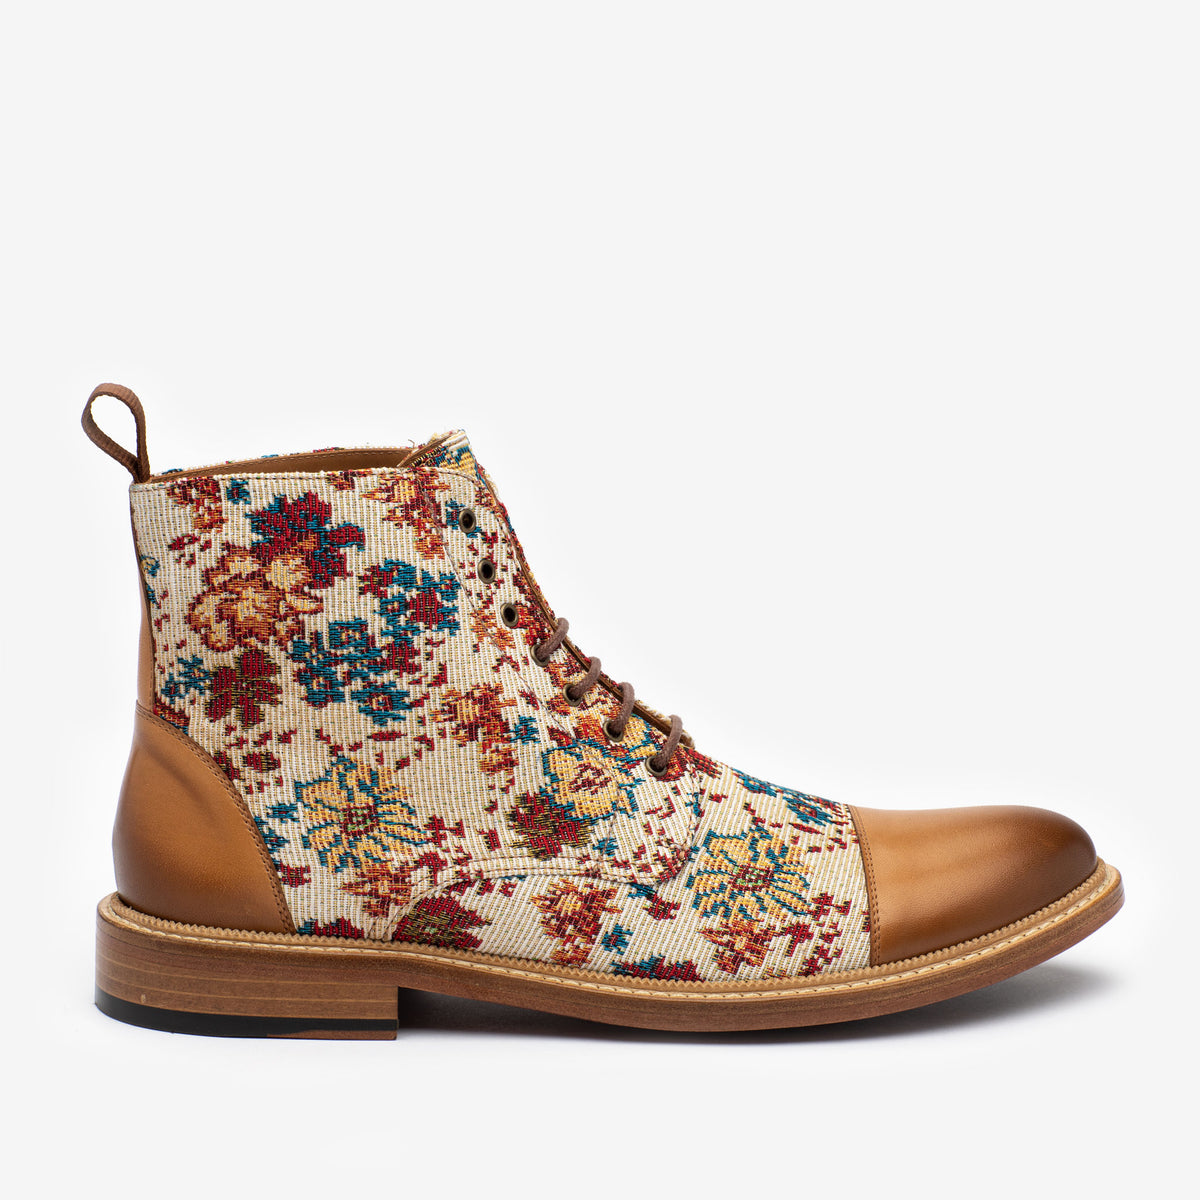 The Jack Boot in Florence - Floral Boot | TAFT